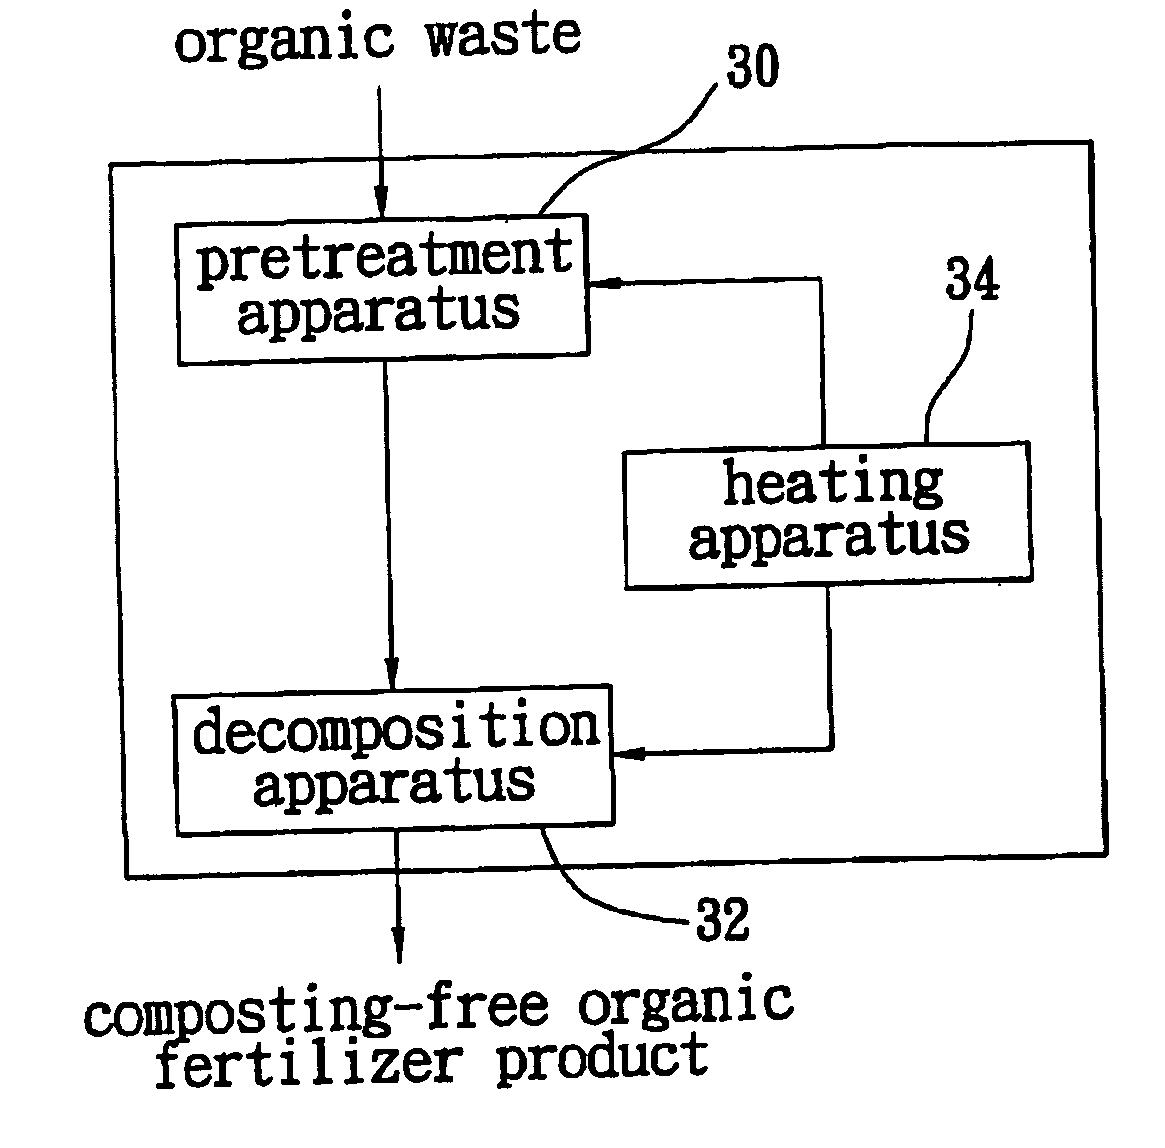 System and method for composting-free disposal of organic wastes